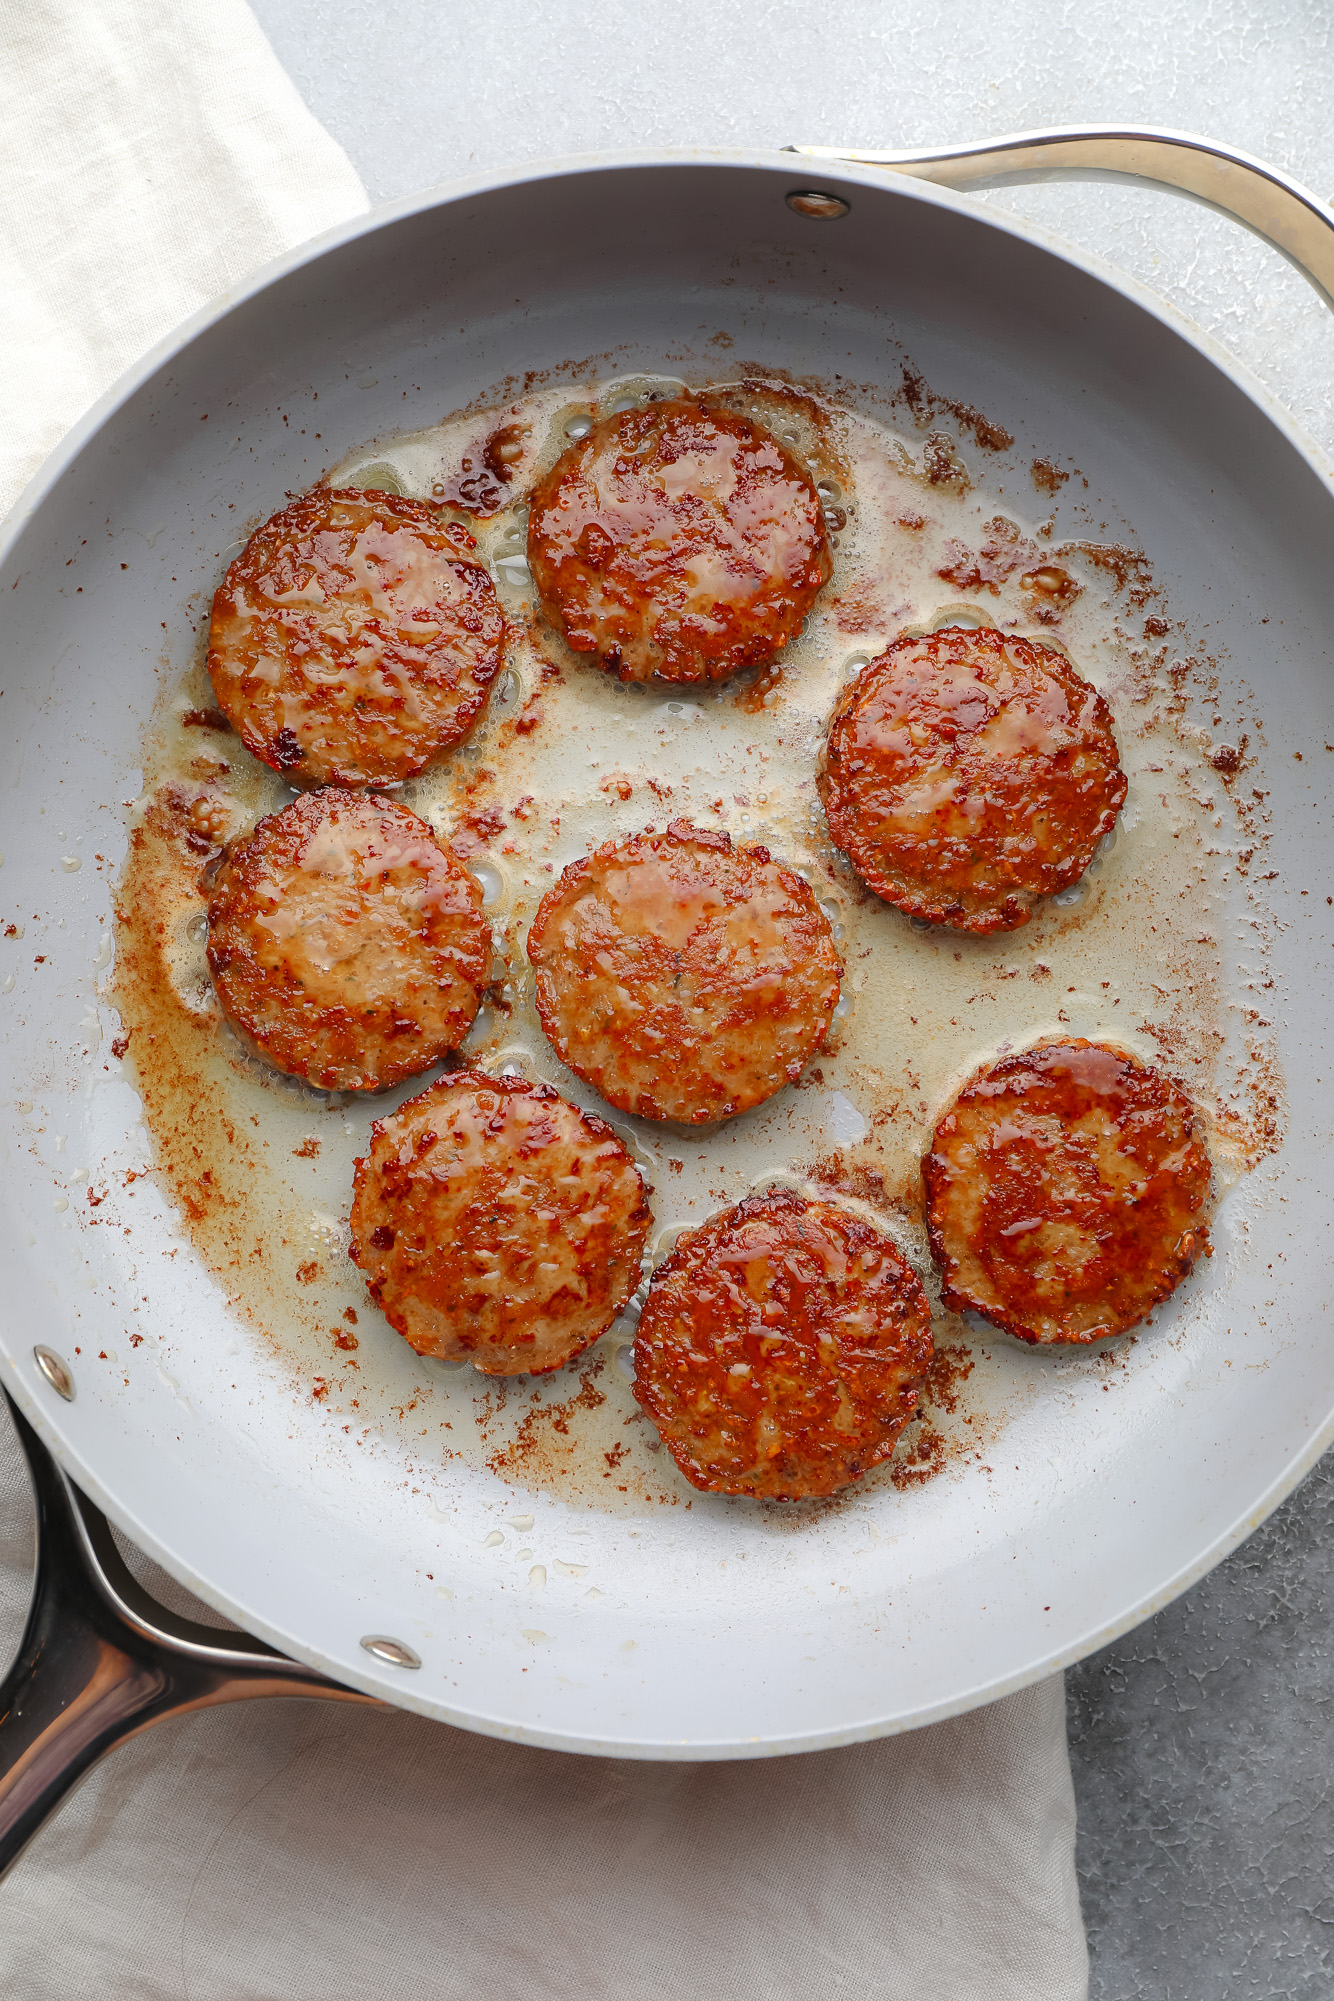 vegan breakfast sausage rounds cooking in a large grey skillet.